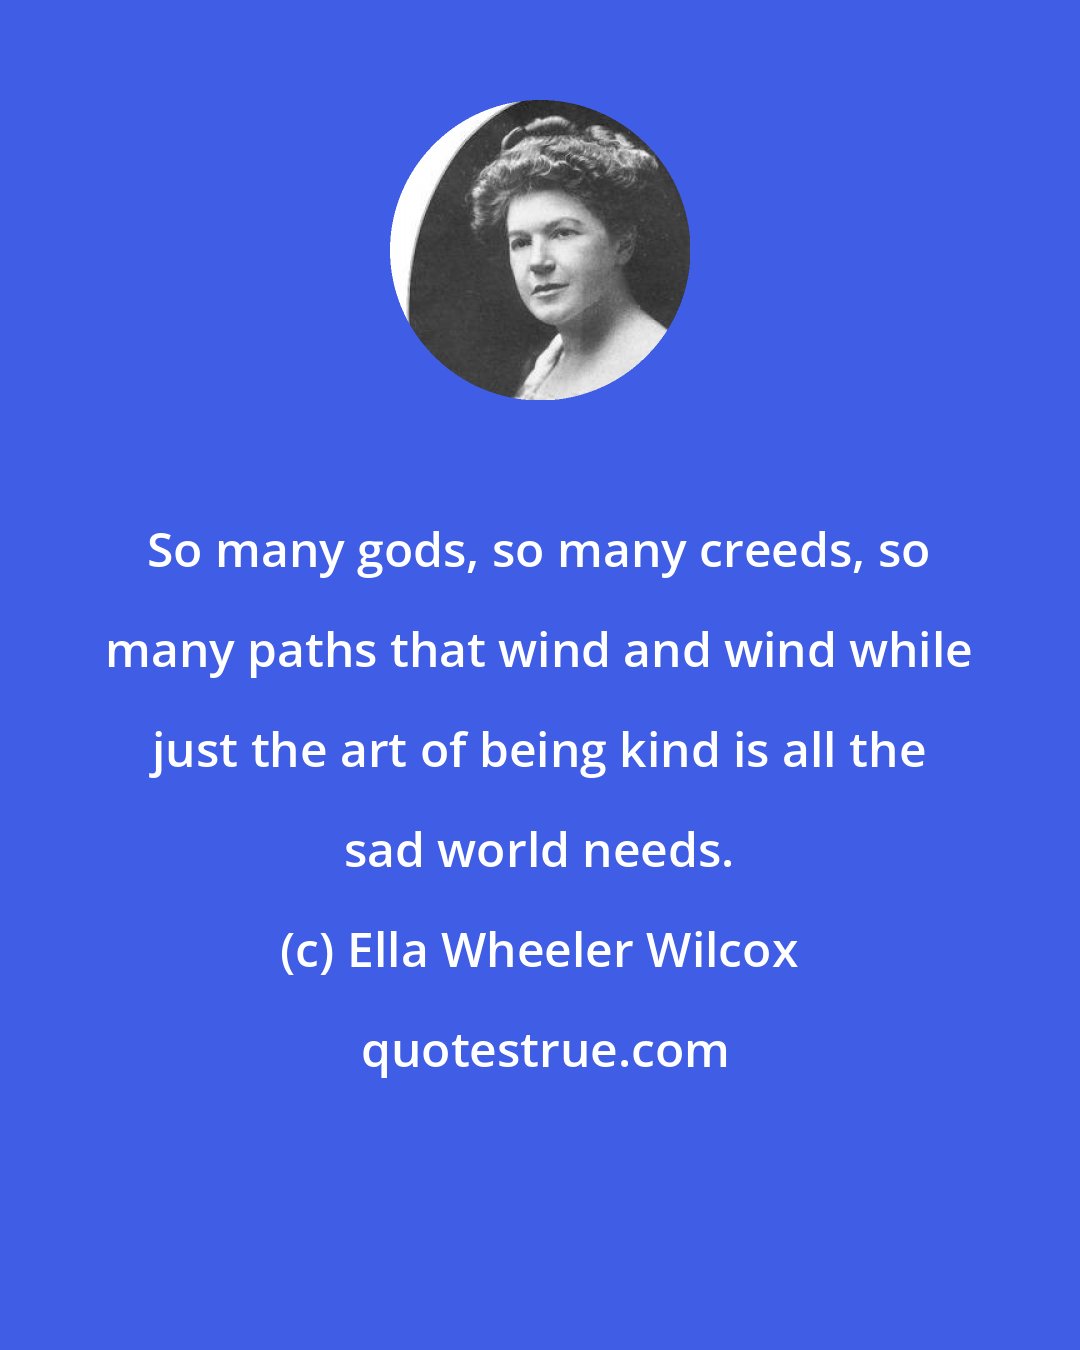 Ella Wheeler Wilcox: So many gods, so many creeds, so many paths that wind and wind while just the art of being kind is all the sad world needs.